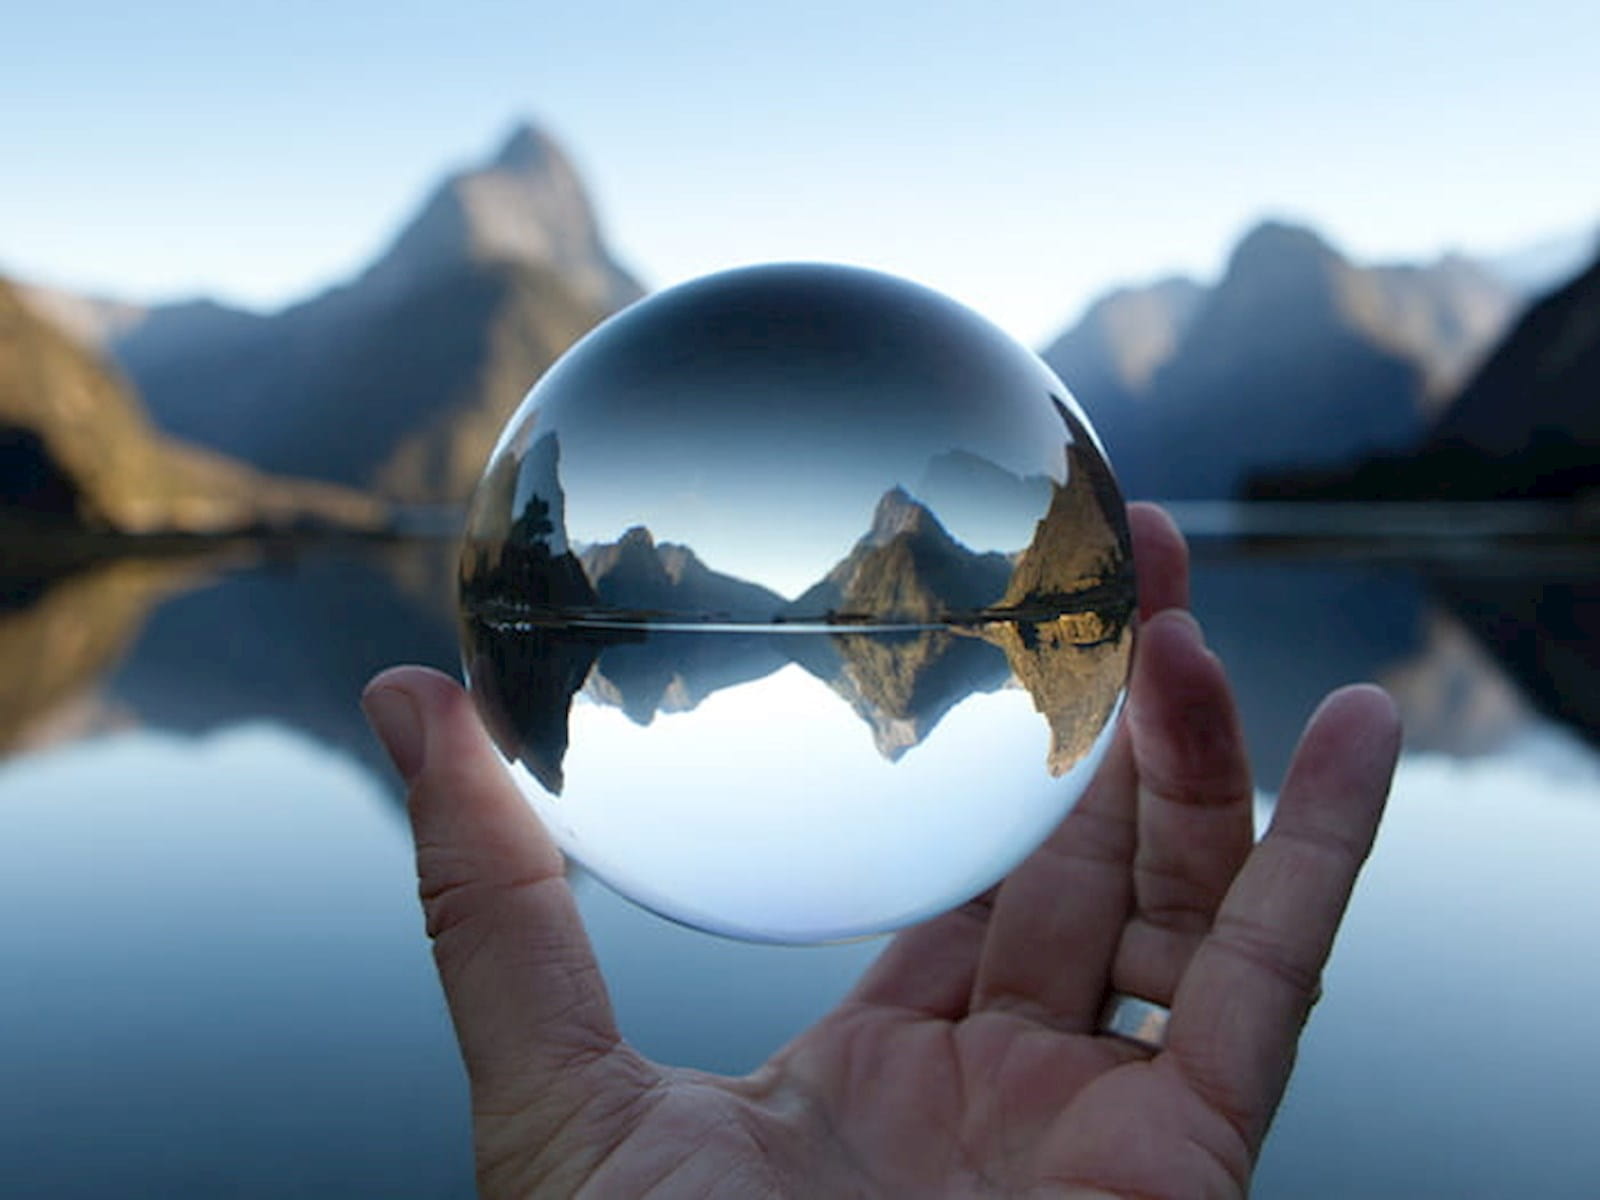 glass ball orb held in human person's hand fingers in front of lake and mountains blue sky water